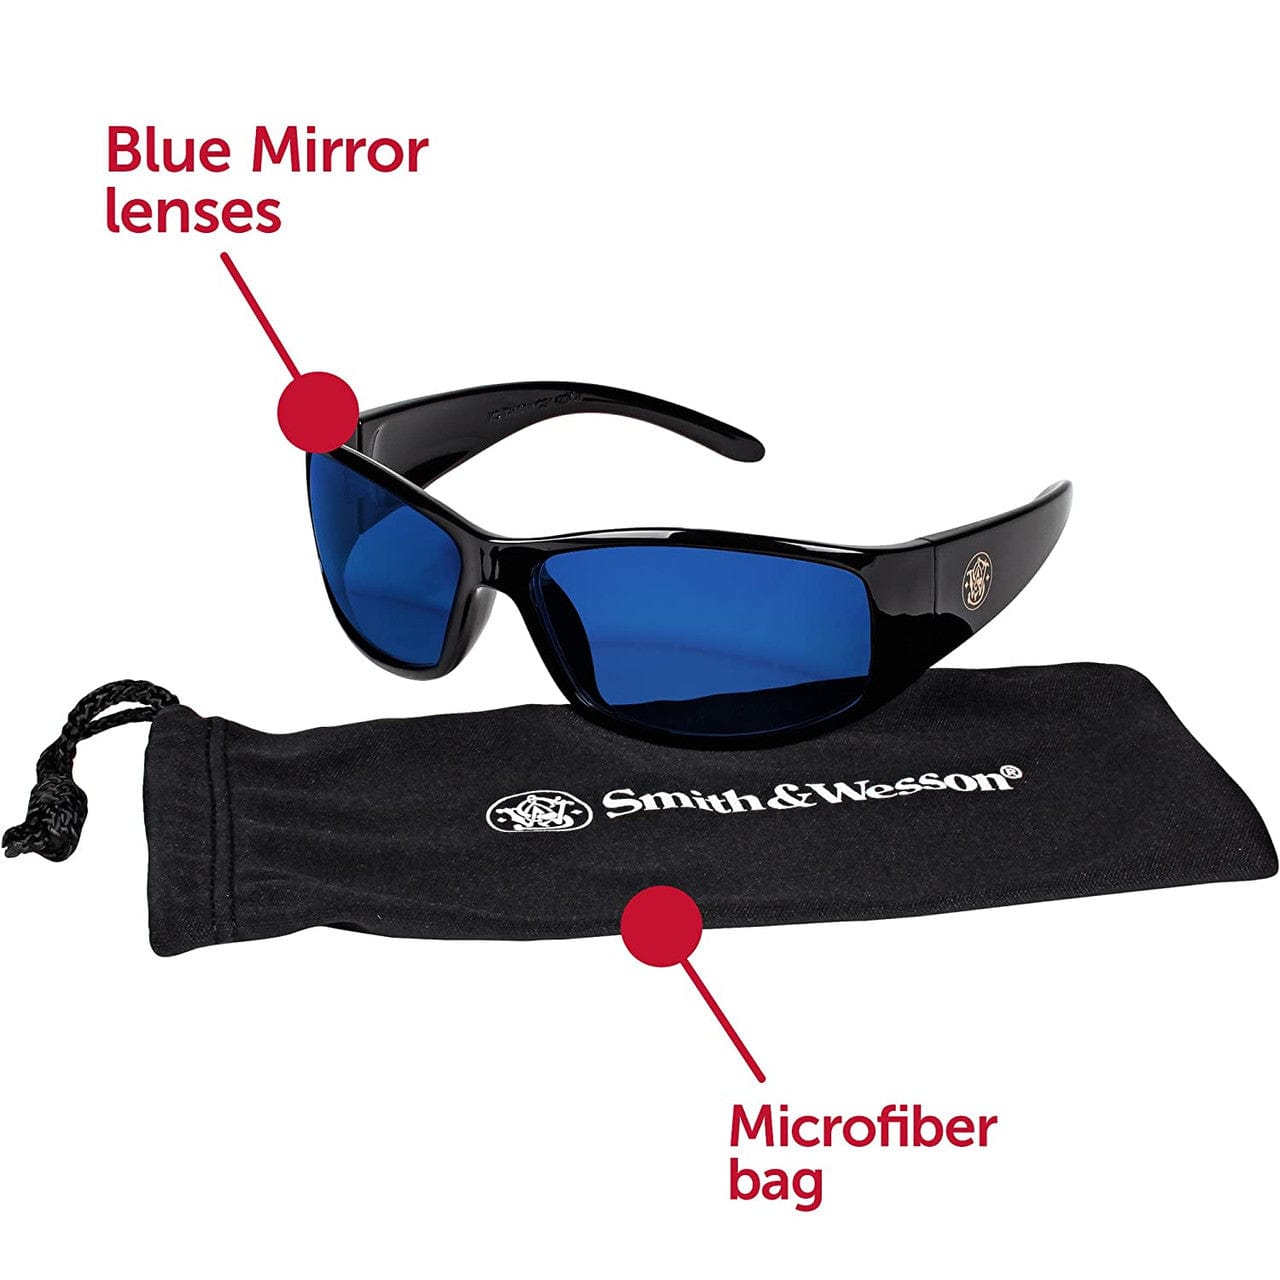 Smith & Wesson Elite Safety Glasses with Blue Mirror Lens 21307 Key Features